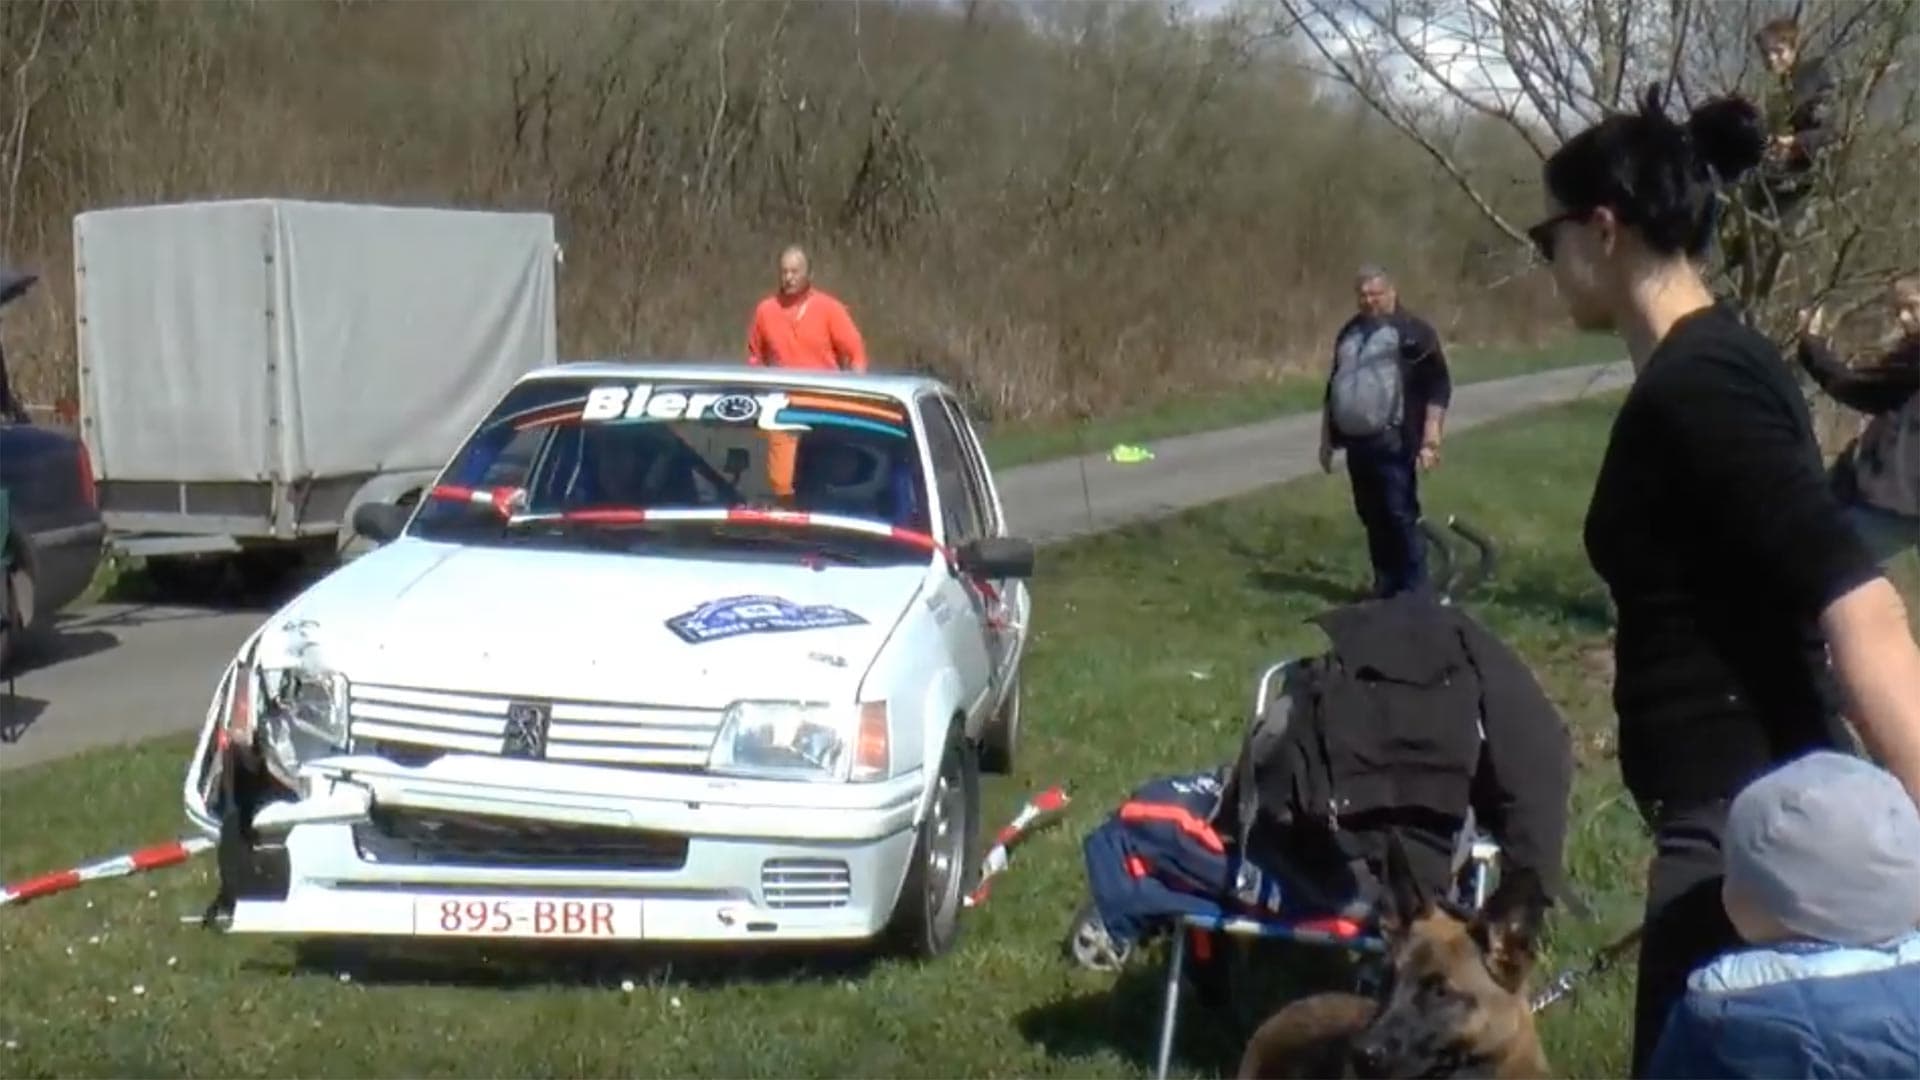 Watch a Crashing Peugeot Rally Car Nearly Hit a Baby